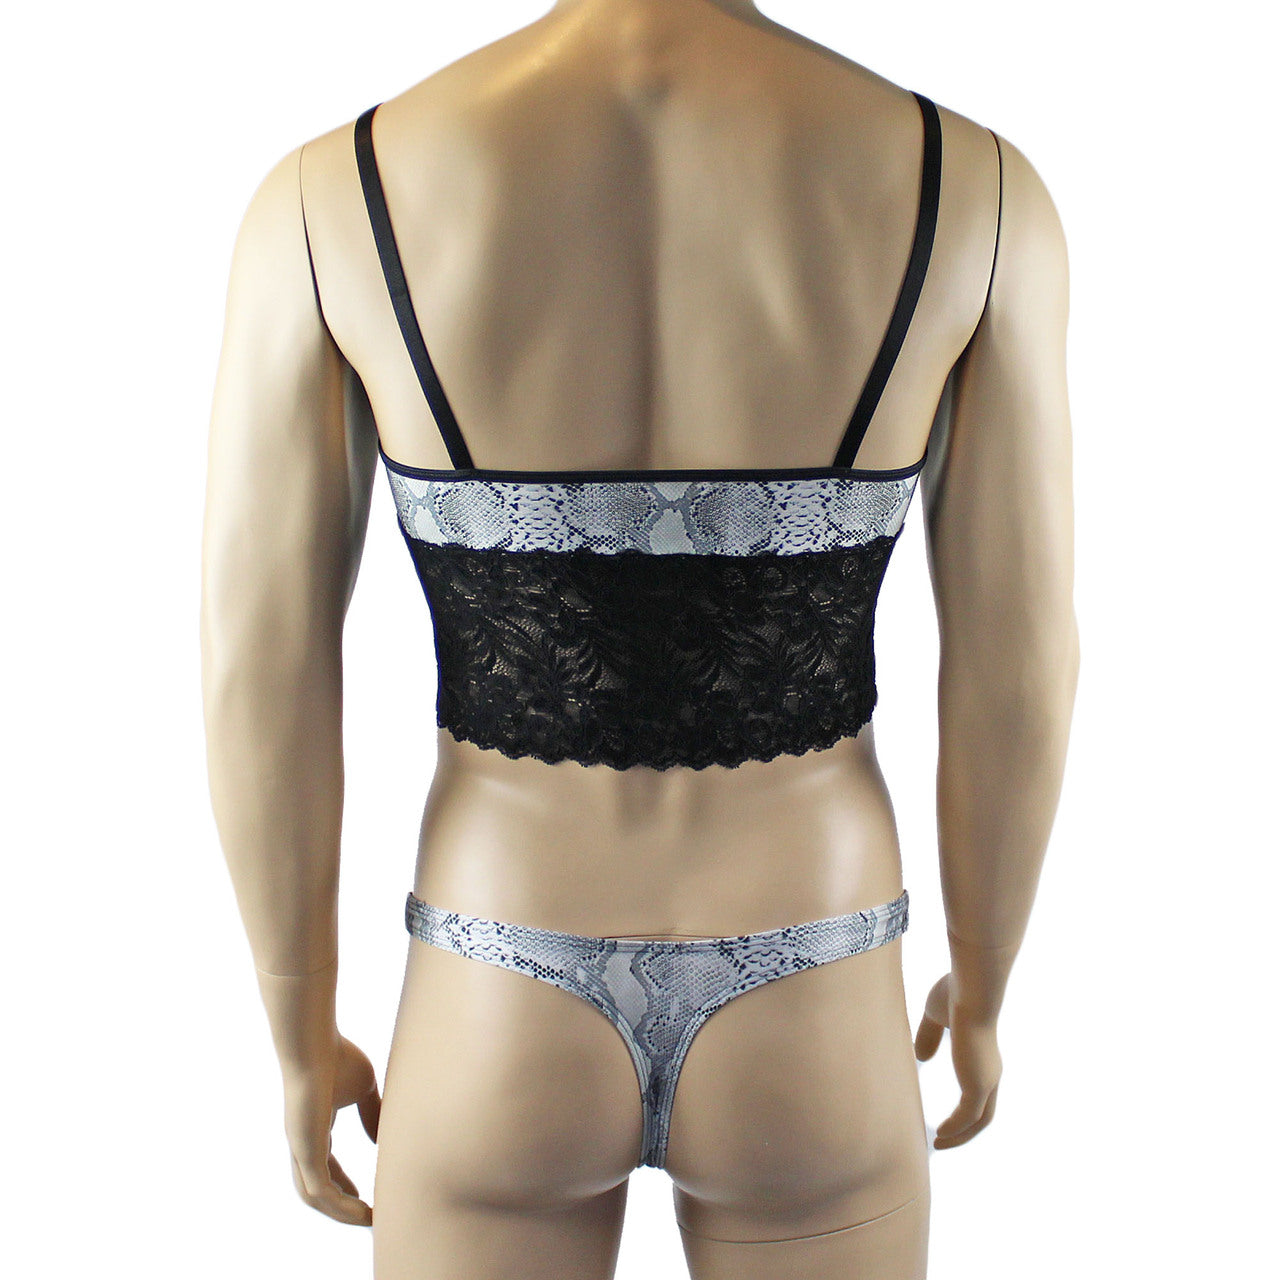 Mens Grey Snake Print & Black Lace Mens Bra Top Camisole and Thong